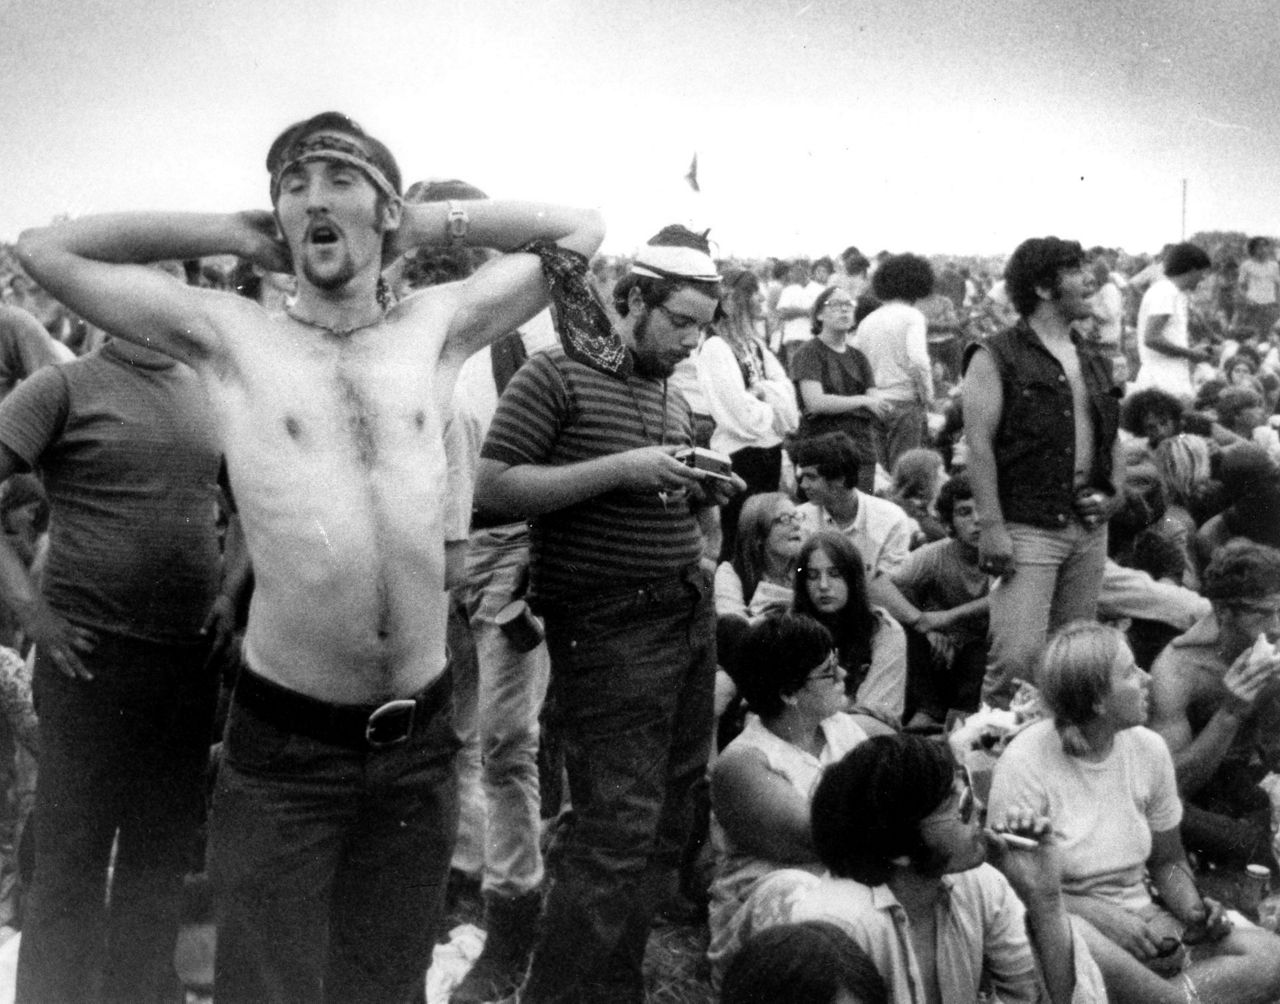 No Chaos This Time As Woodstock Concert Site Preps For Th